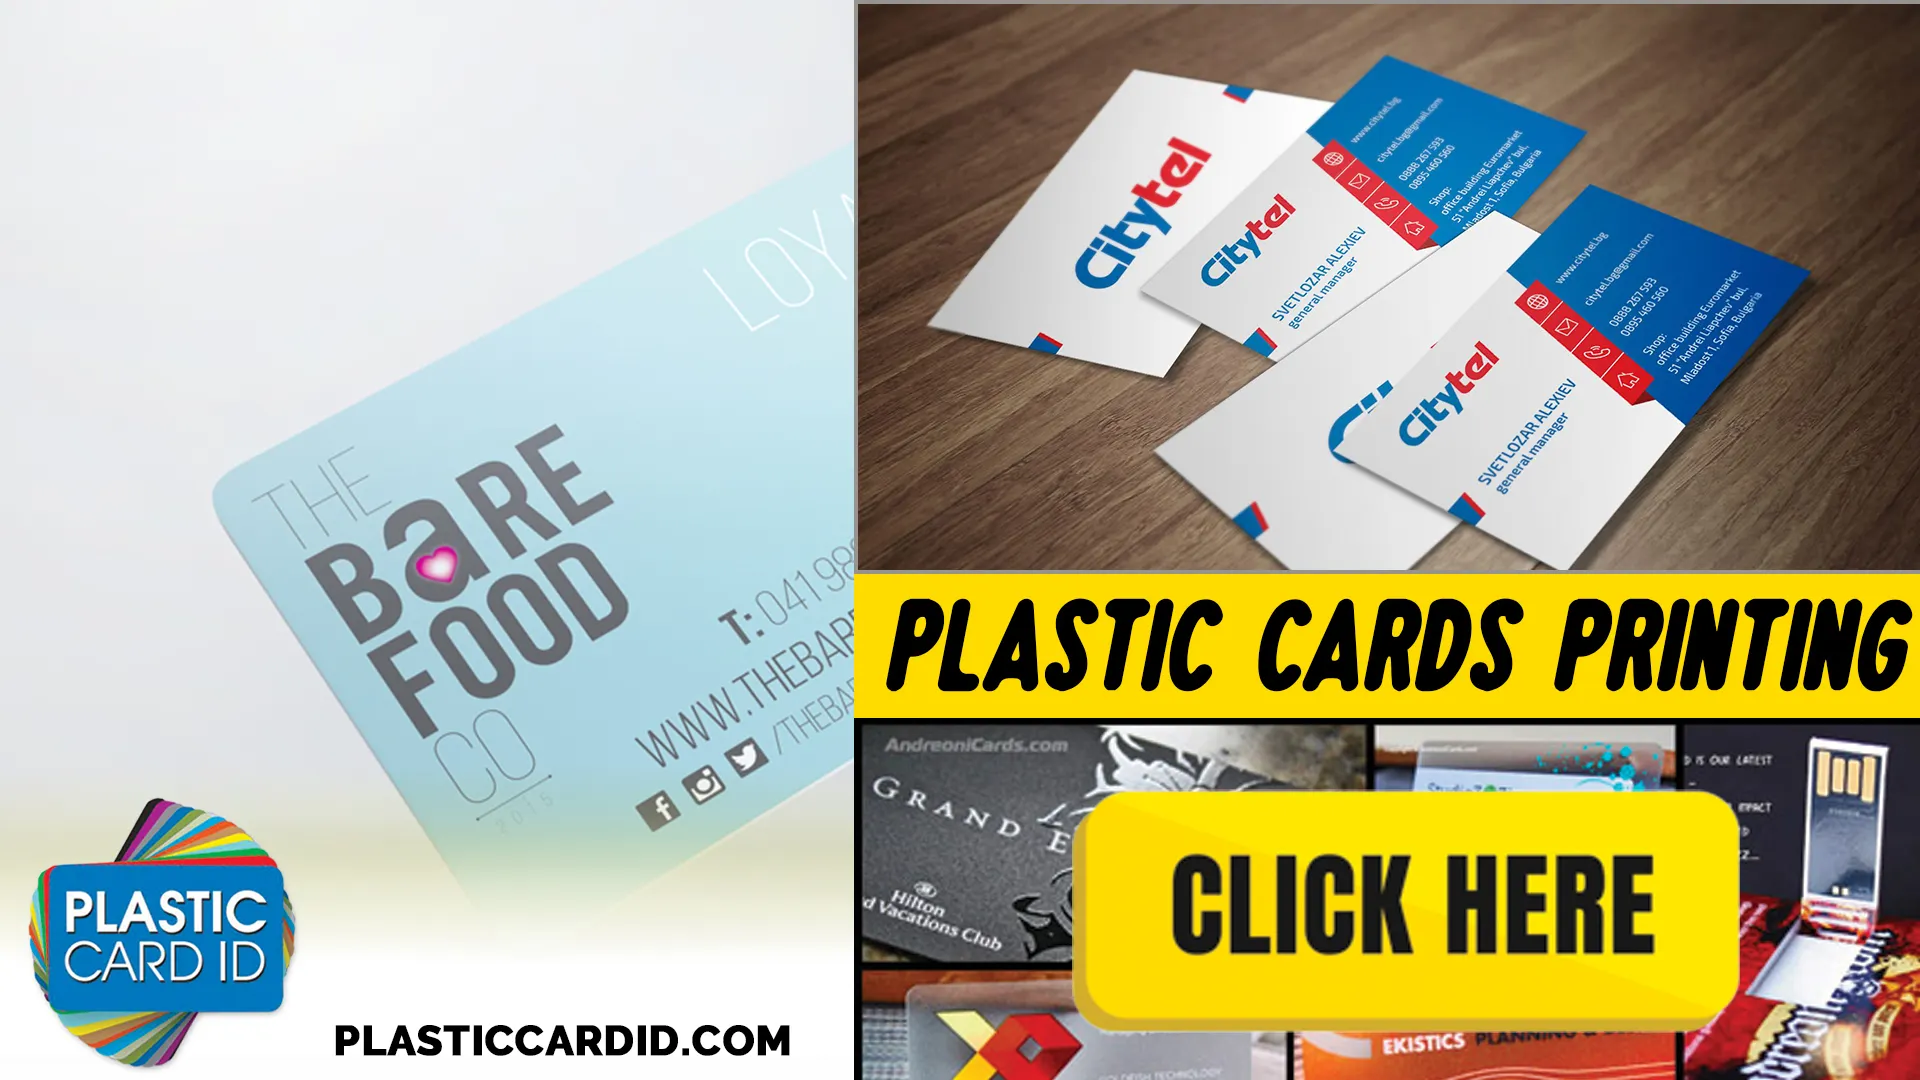 Plastic Cards: A Gateway to Cultural Connection